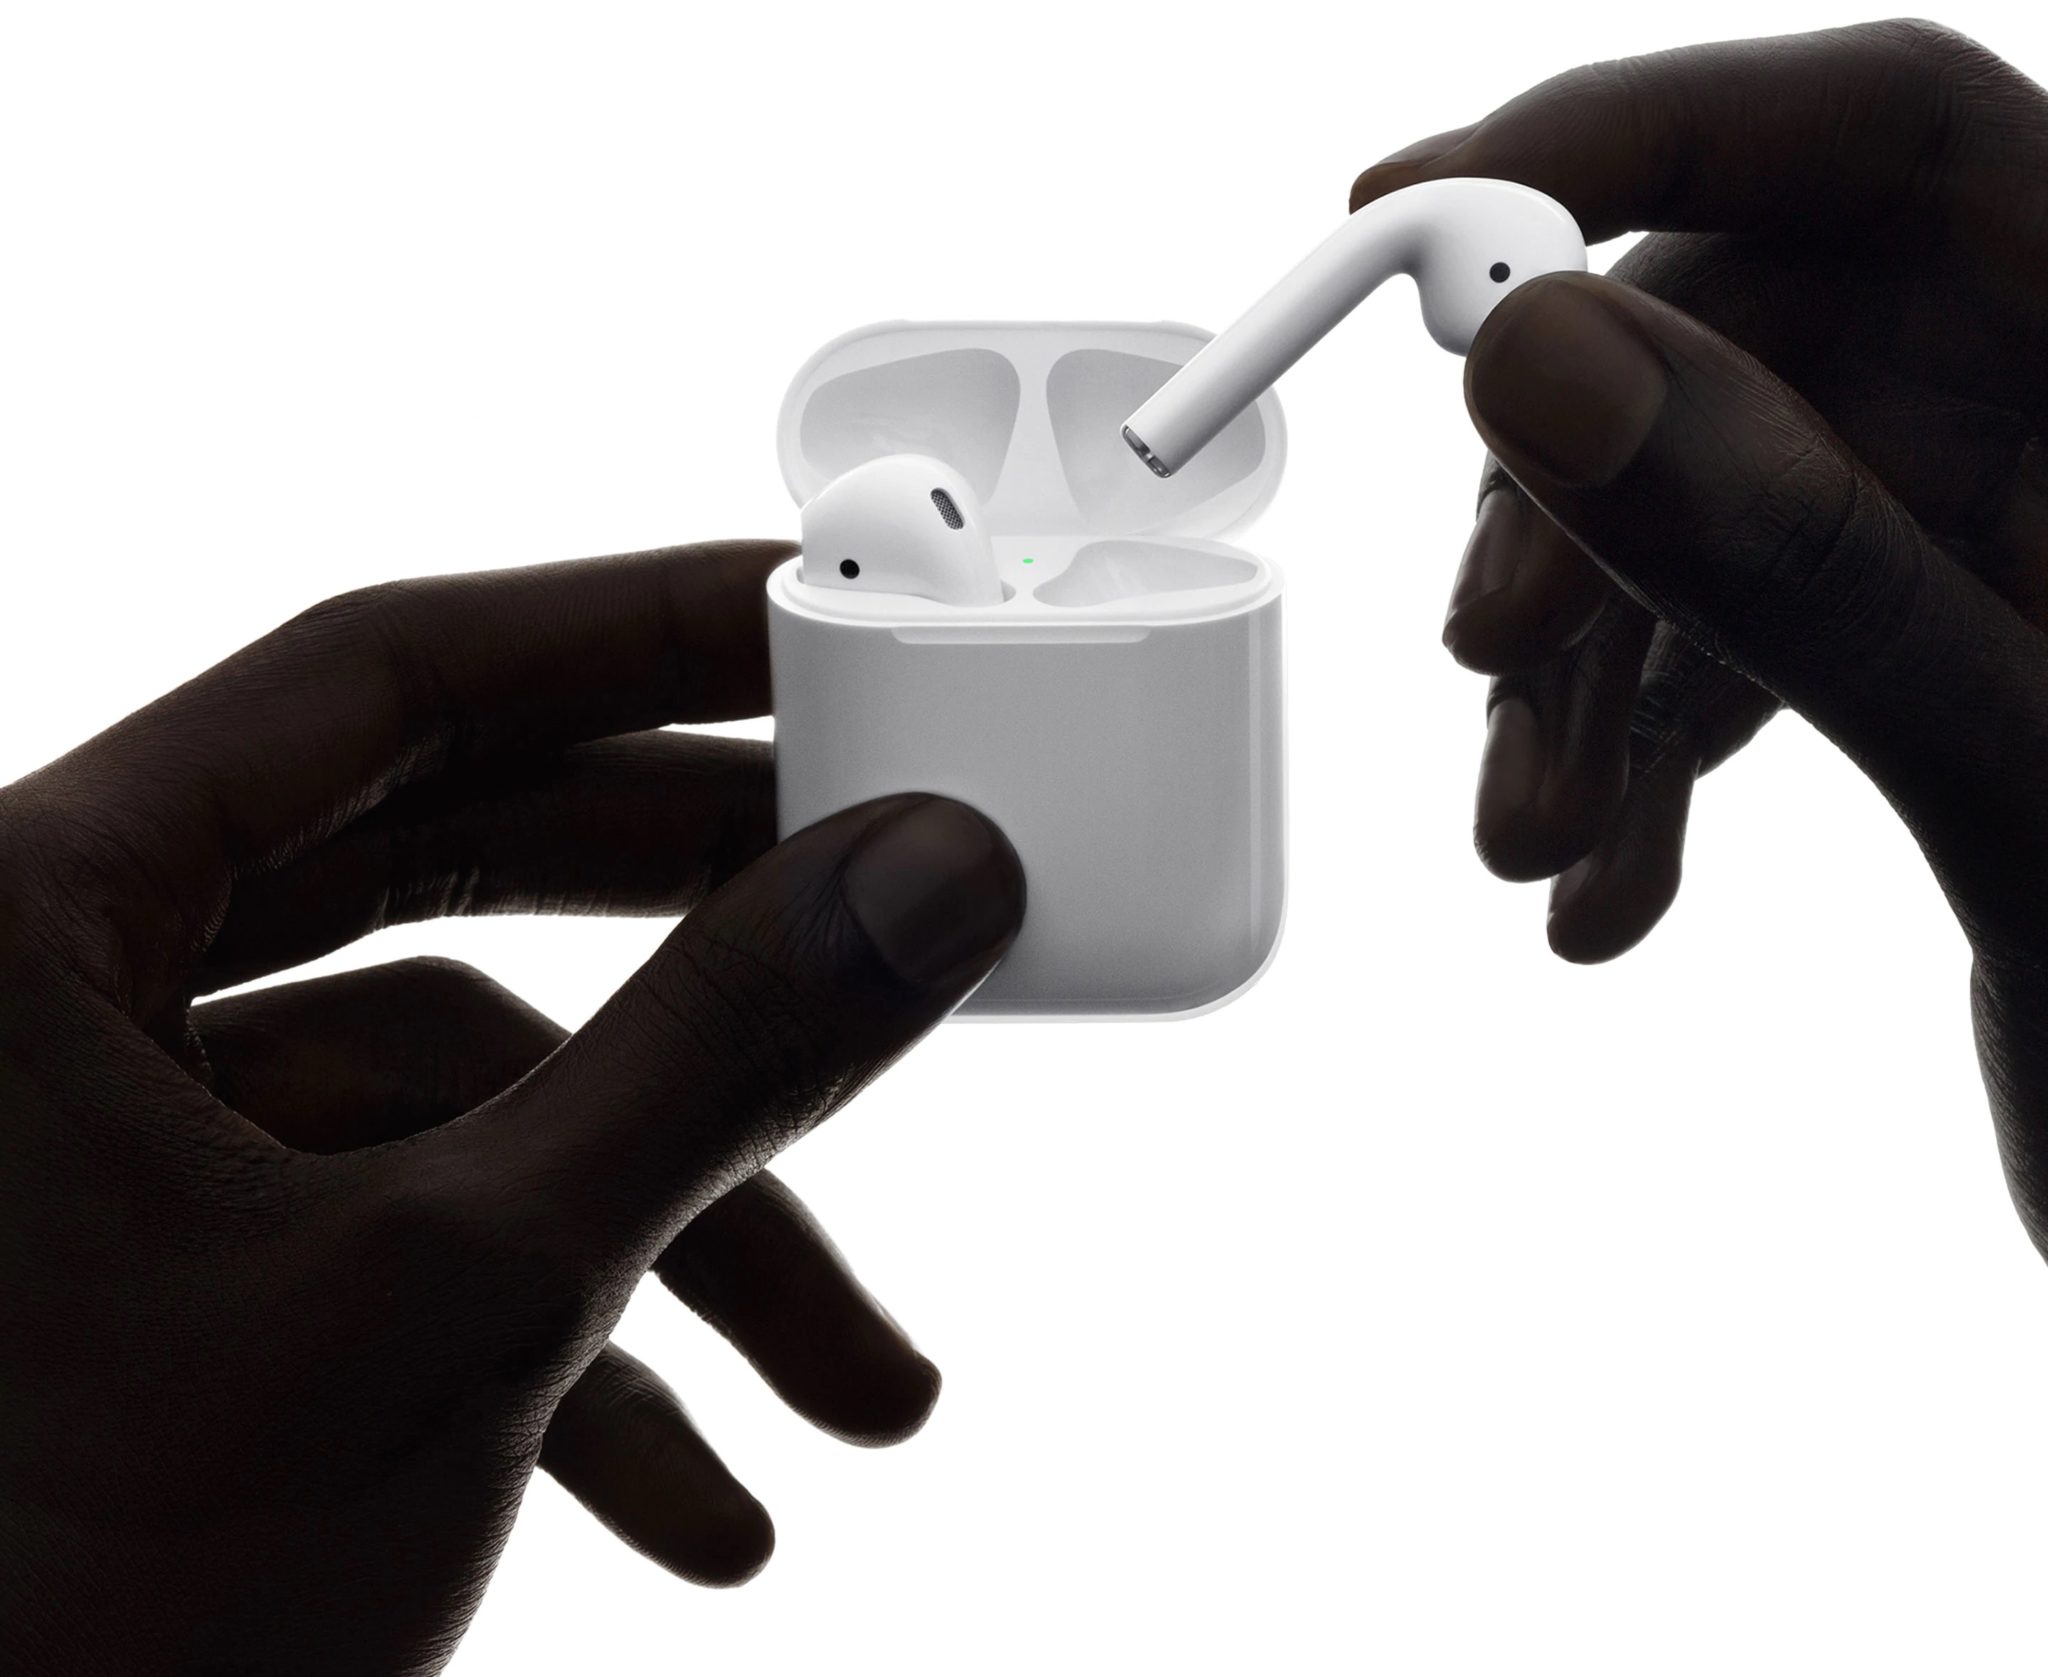 Apple AirPods img2a 1